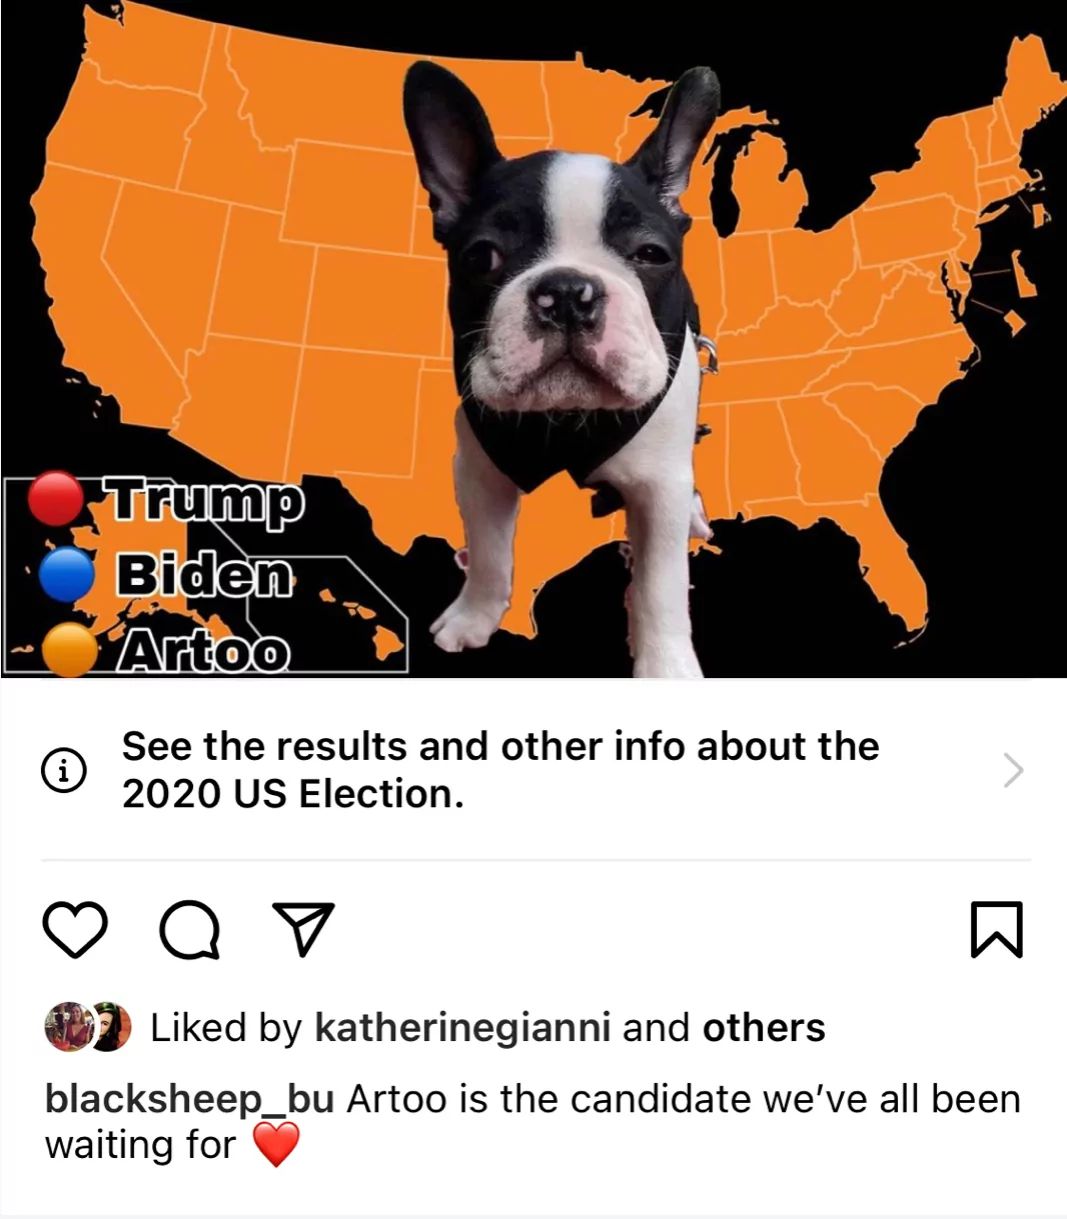 Trump
Biden
Artoo
i
See the results and other info about the
2020 US Election.
Q V
Liked by katherinegianni and others
blacksheep_bu Artoo is the candidate we've all been
waiting for
B